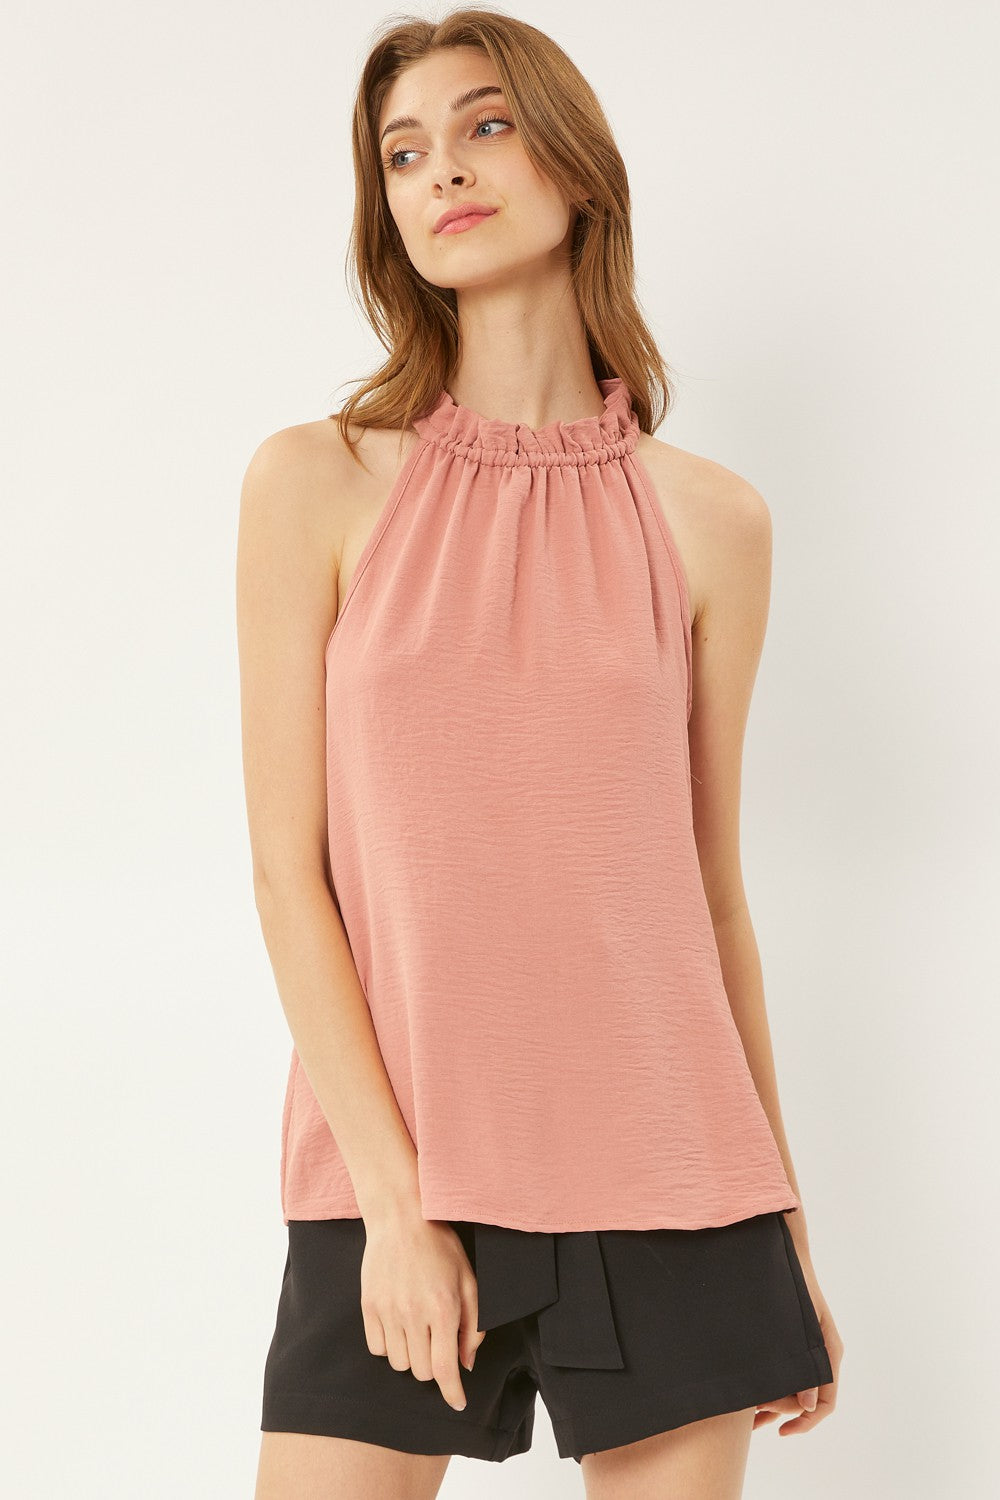 Solid Blush Woven Halter Top